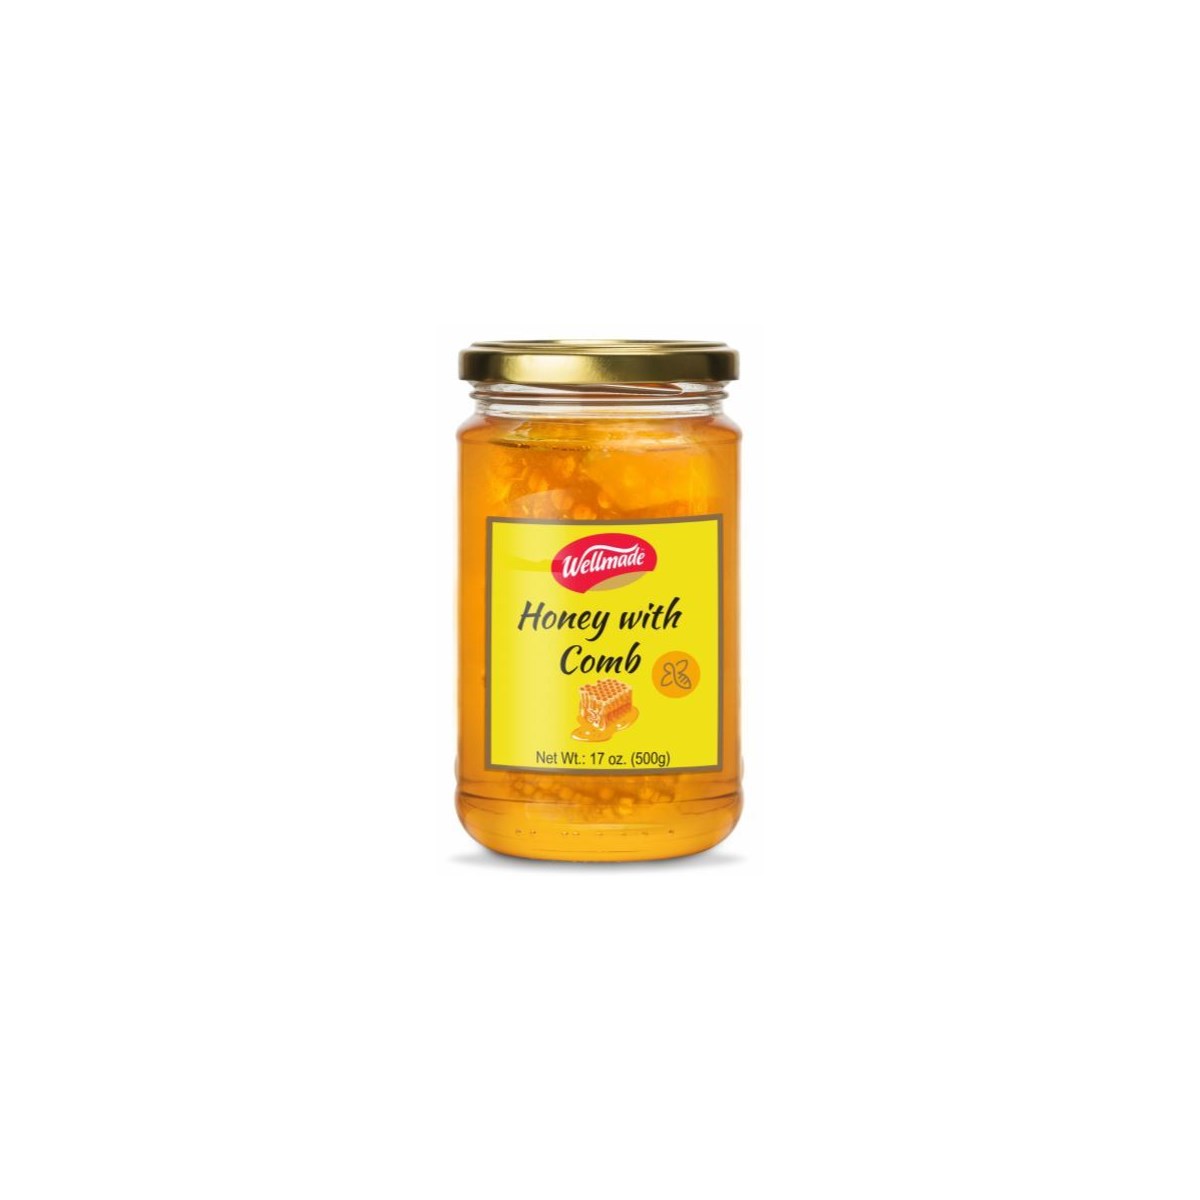 Blossom Honey with Honeycomb in glass jar  "Wellma